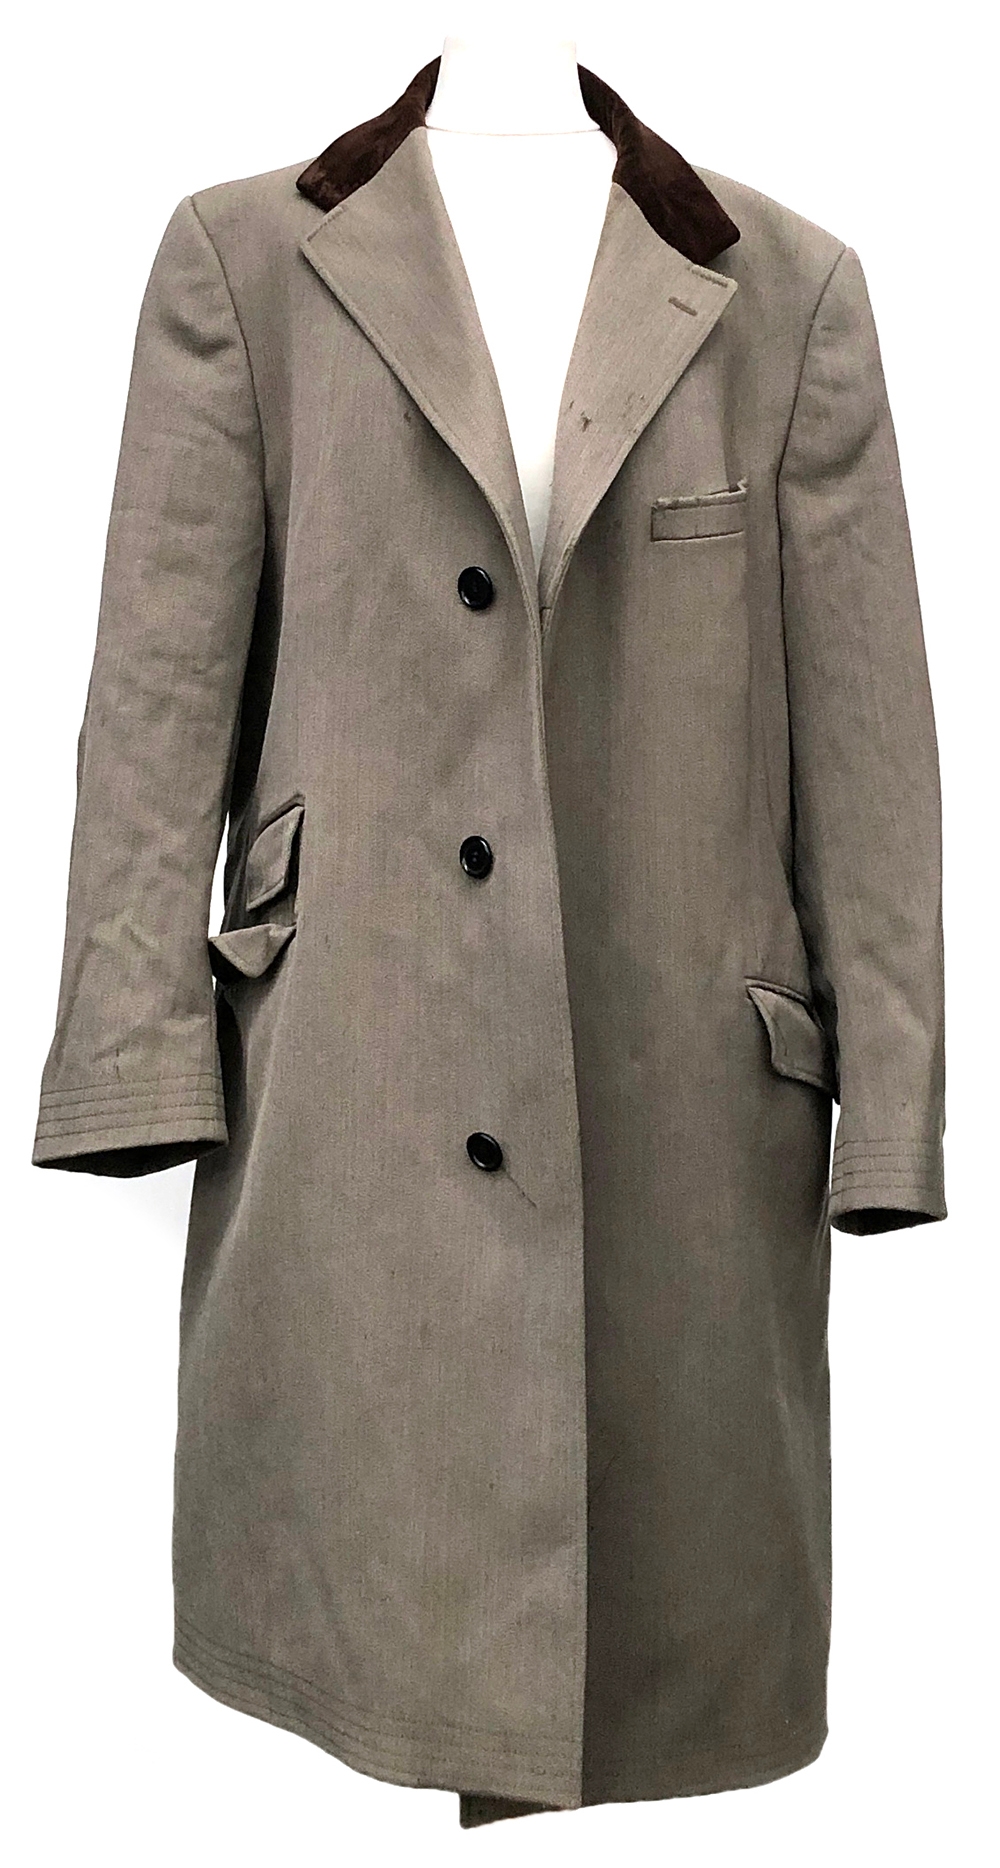 A Swaine & Adeney gent's covert coat, with brown felt collar, some wear, approx. 42" chest